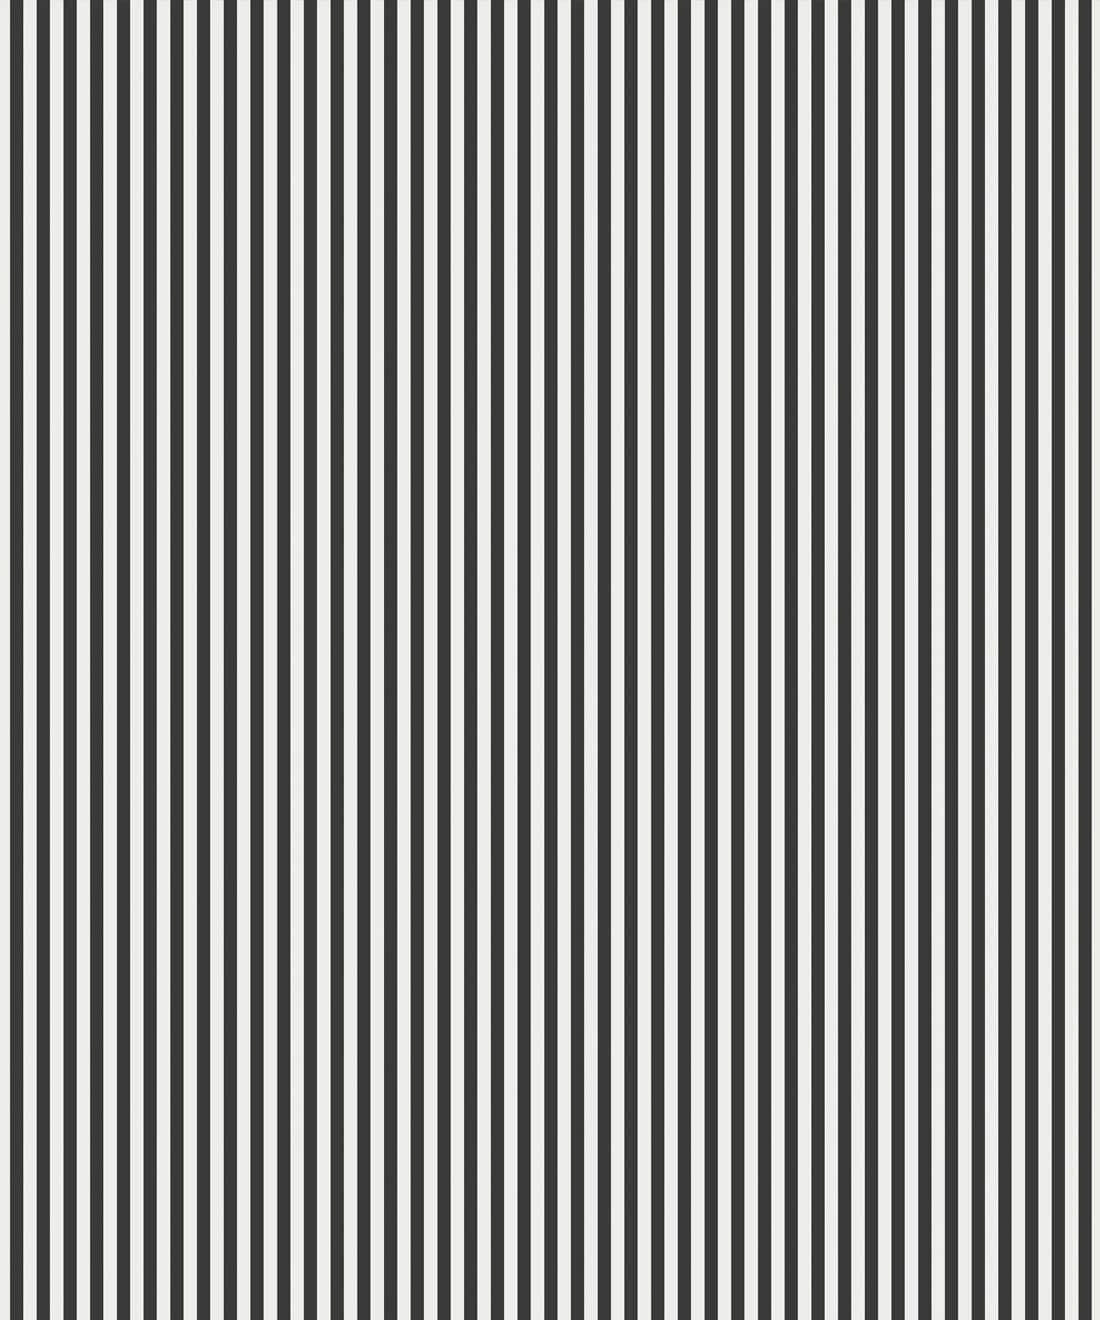 Thin Black And White Stripes Background